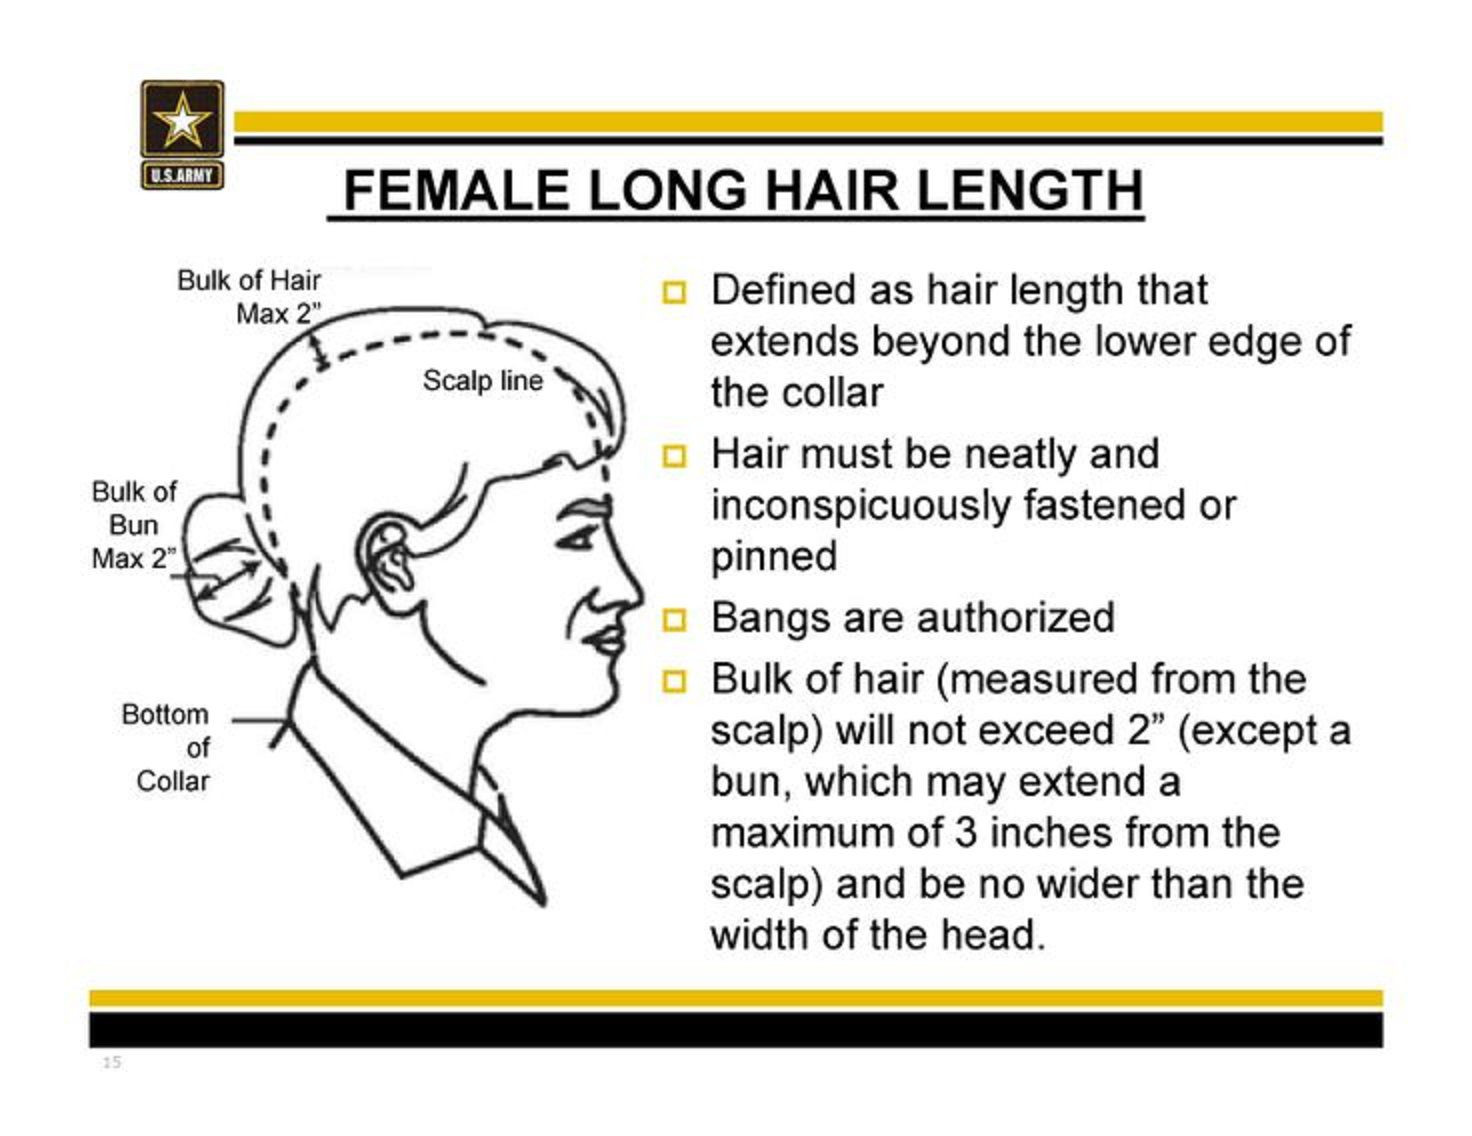 Female Authorized Hairstyles Army
 Army Grooming Appearance and Uniform Standards